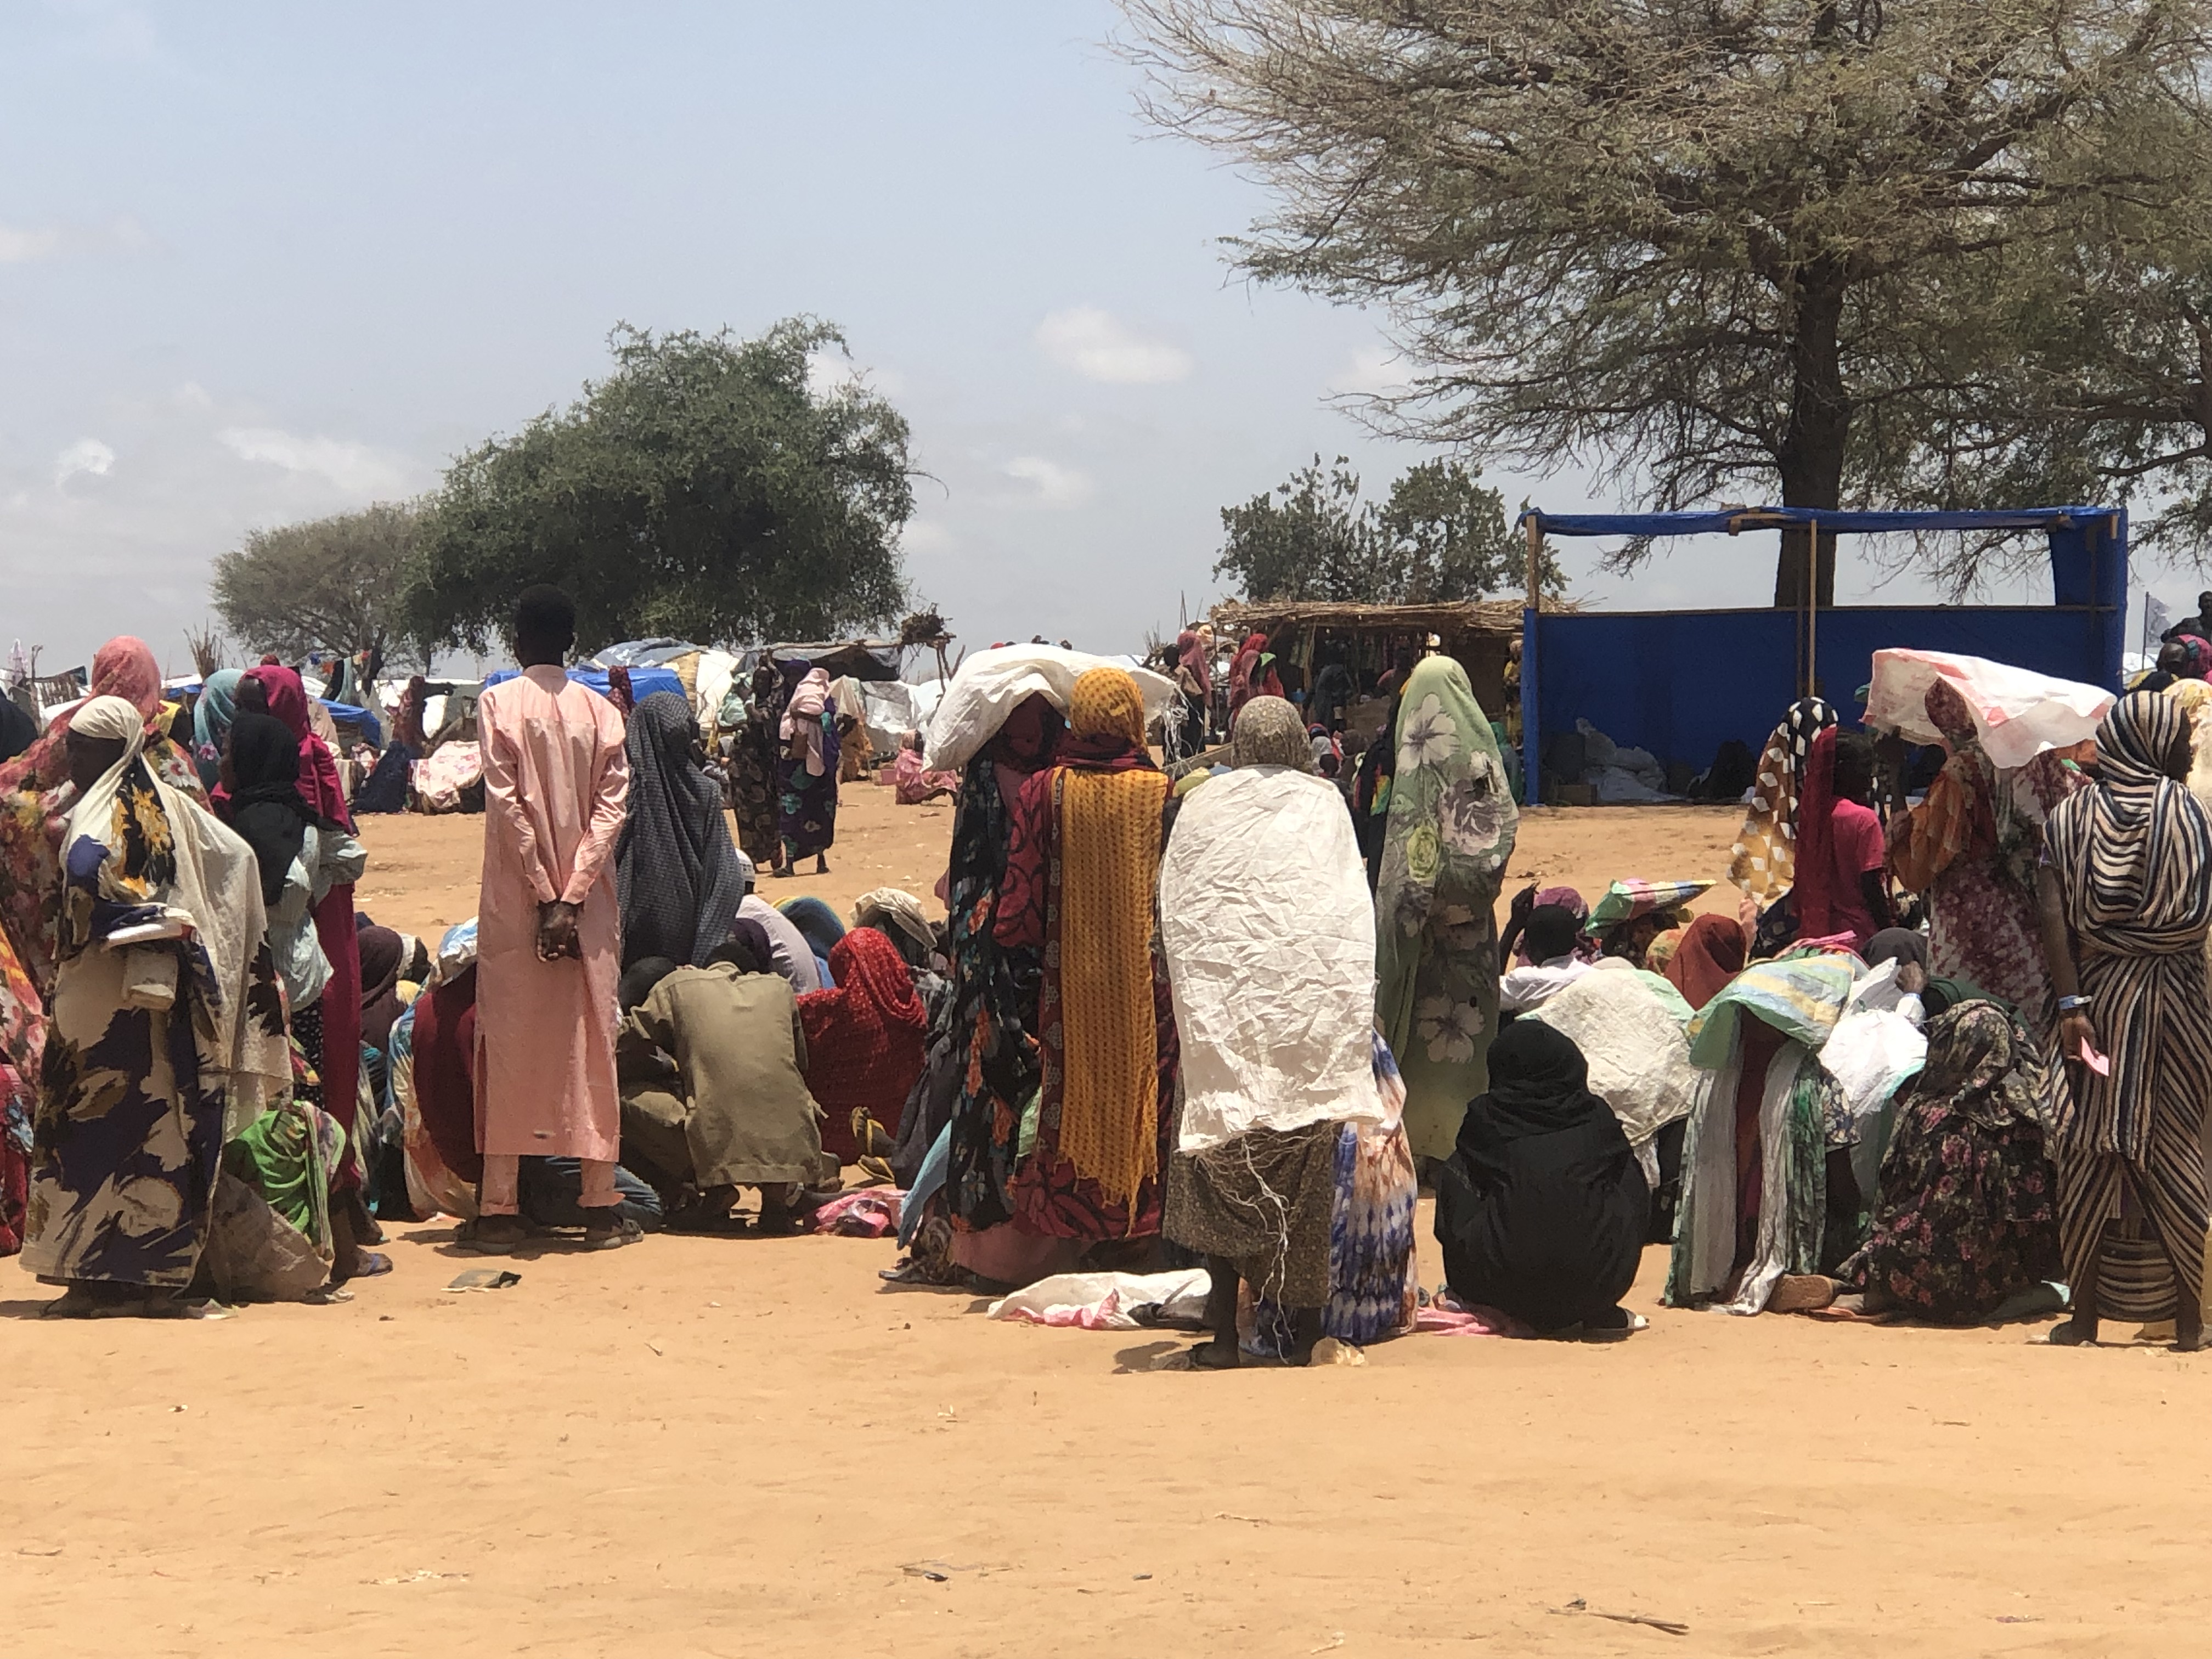 Refugees waiting at food distribution site in Chad.